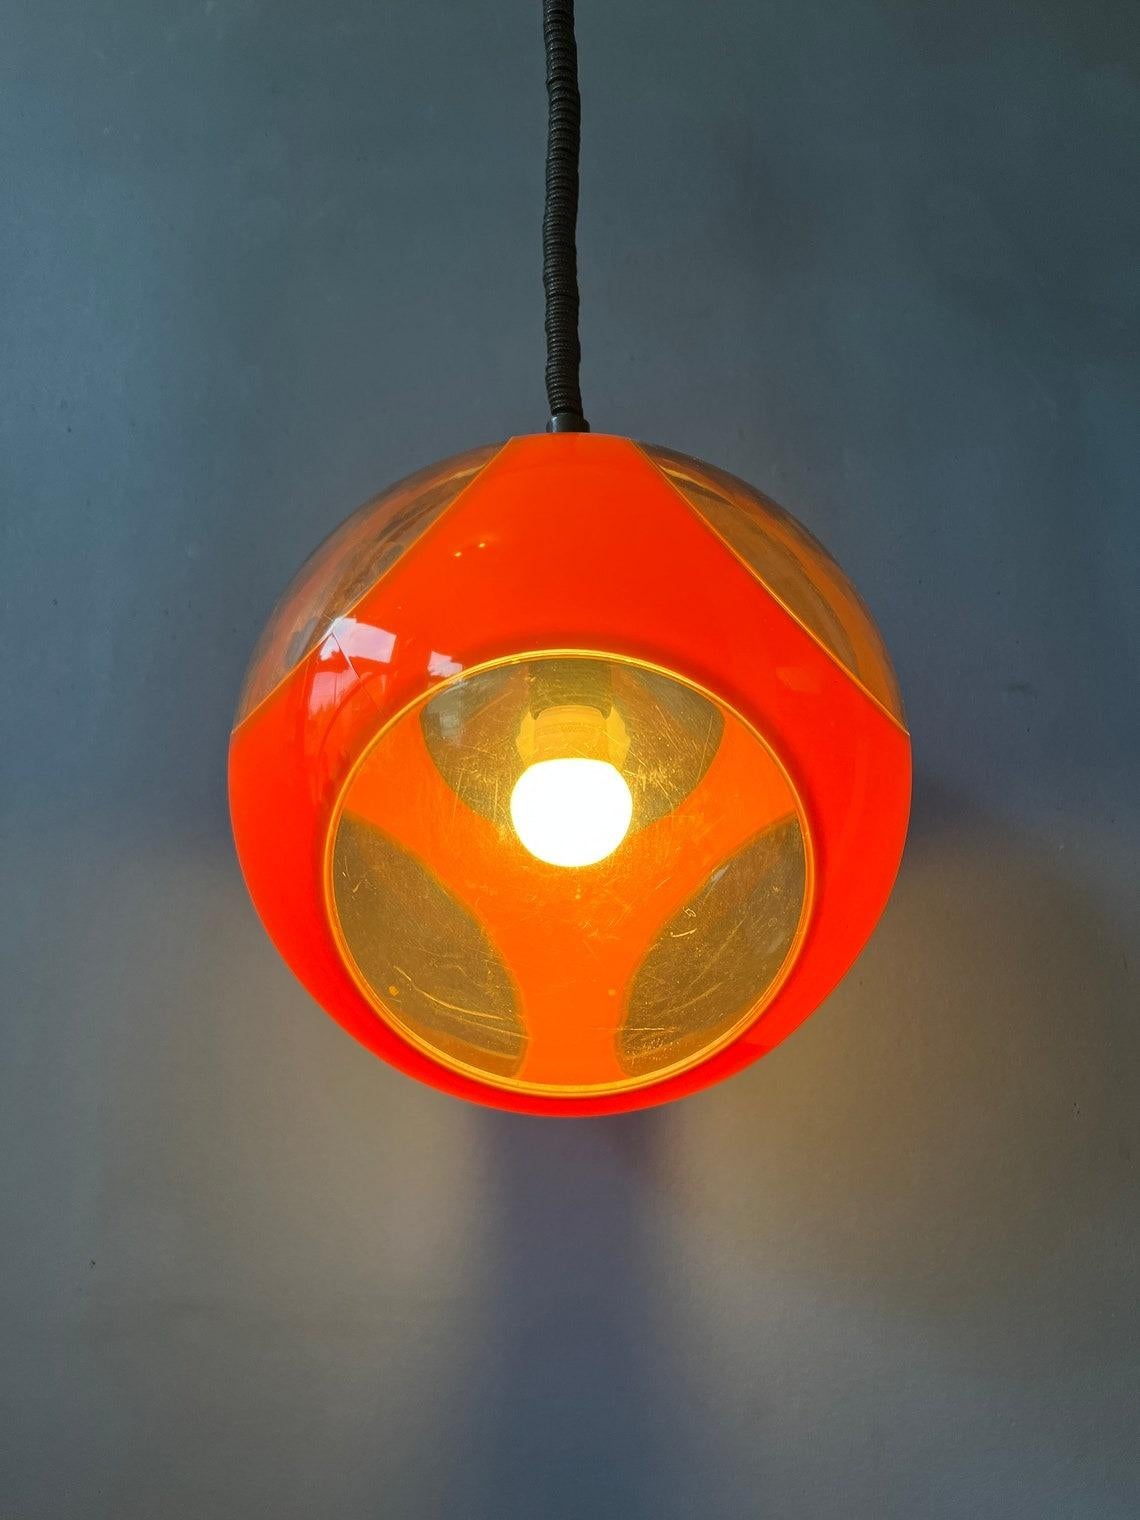 Iconic orange bug eye pendant lamp by Massive, often attributed to Luigi Colani.The lamp requires one E27/26 lightbulbs.

Additional information:
Materials: Metal, plastic
Period: 1970s
Dimensions: ø Shade: 28 cm
Height Shade: 28 cm
Condition:Good.